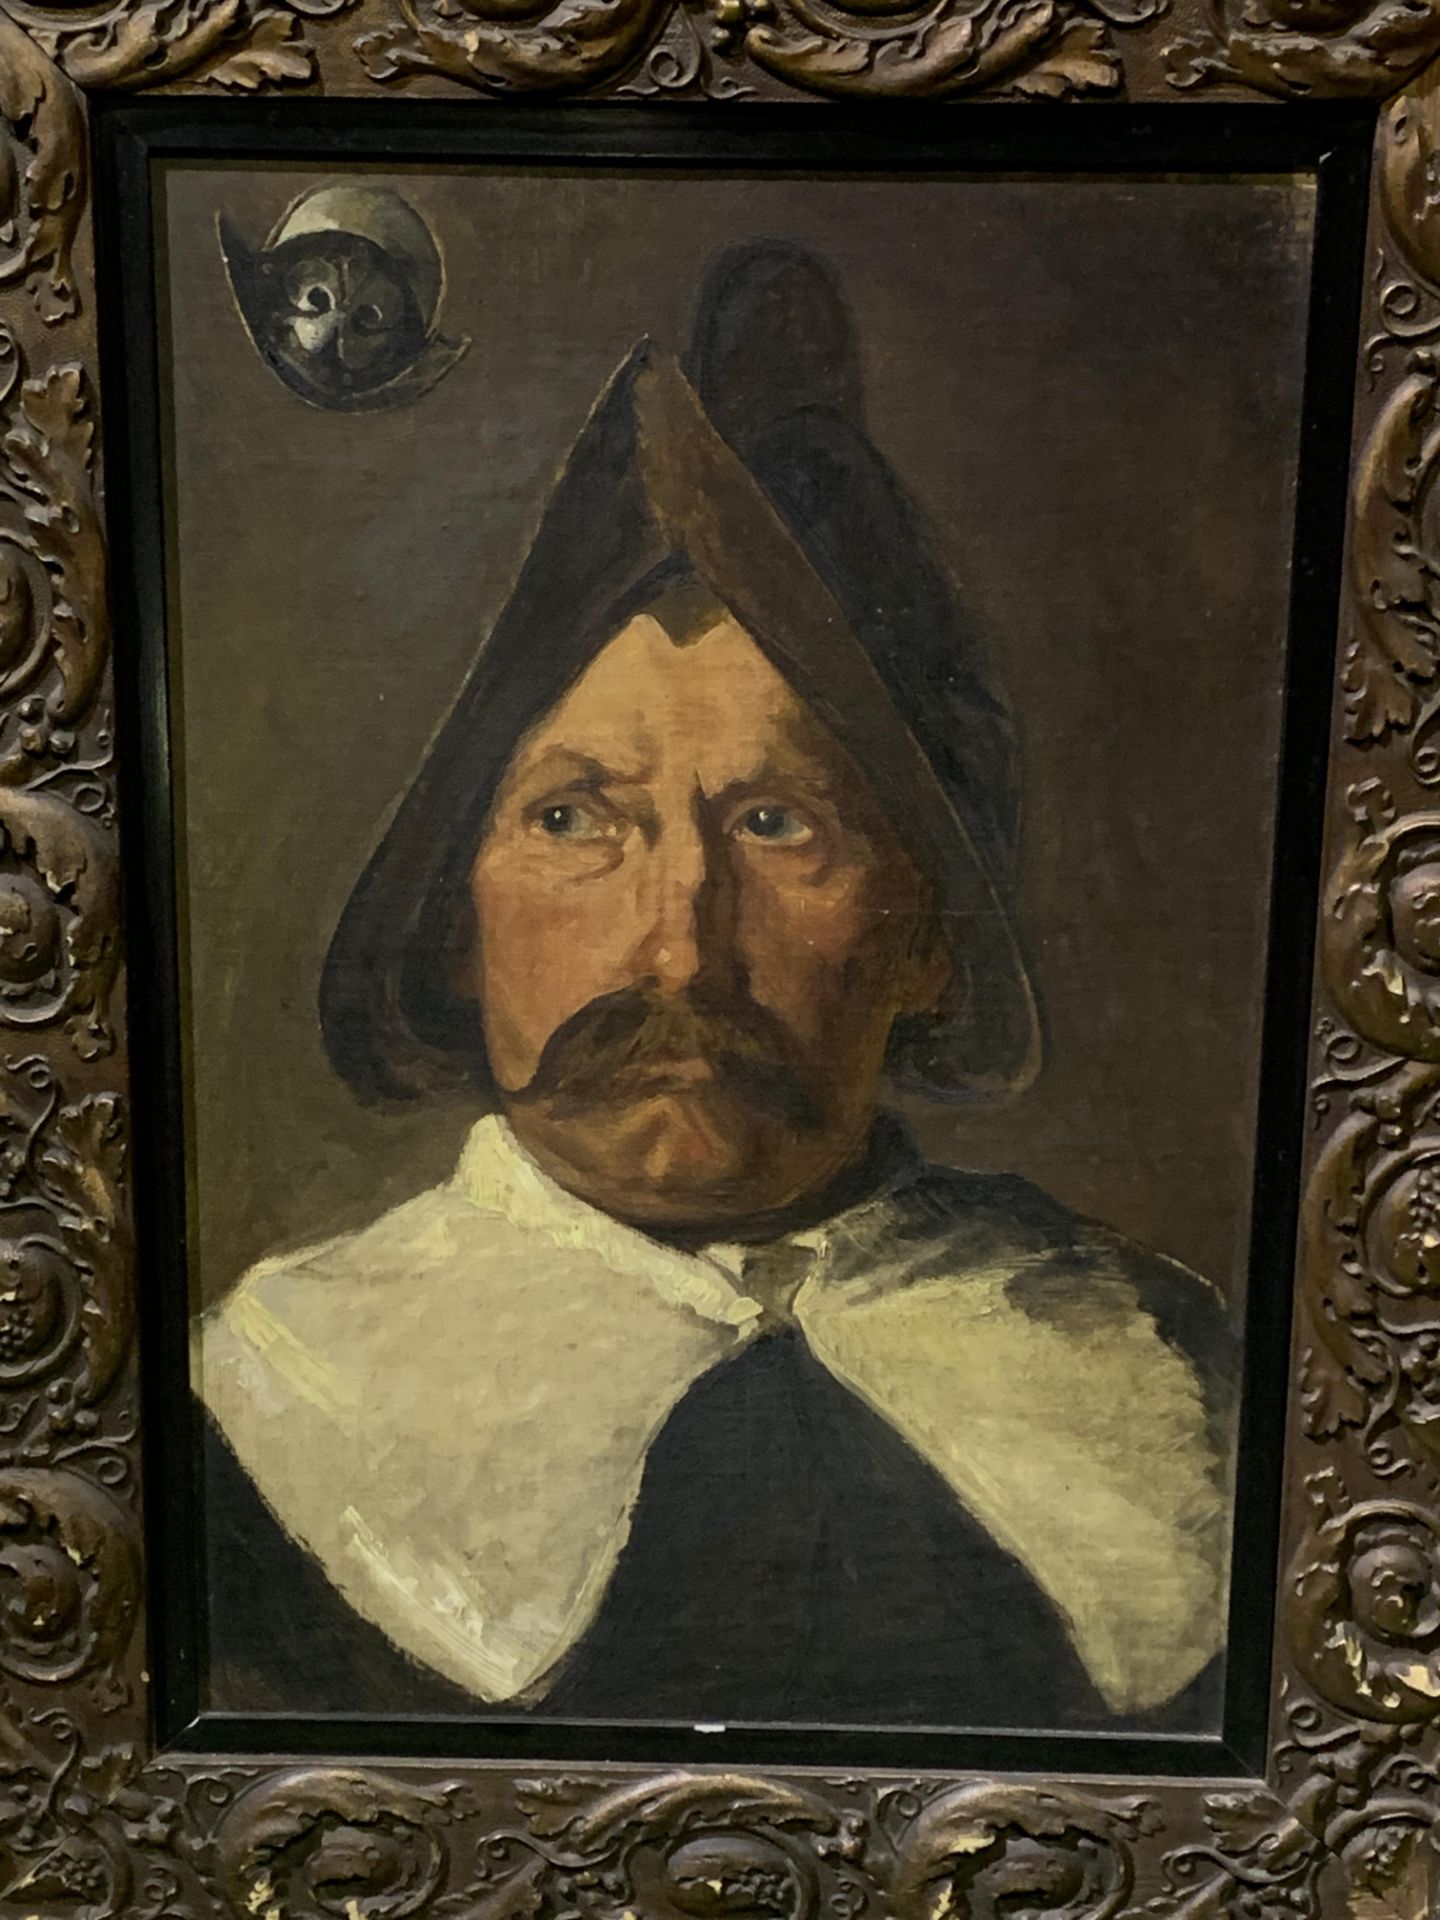 Decorative framed oil on board of a Conquistador